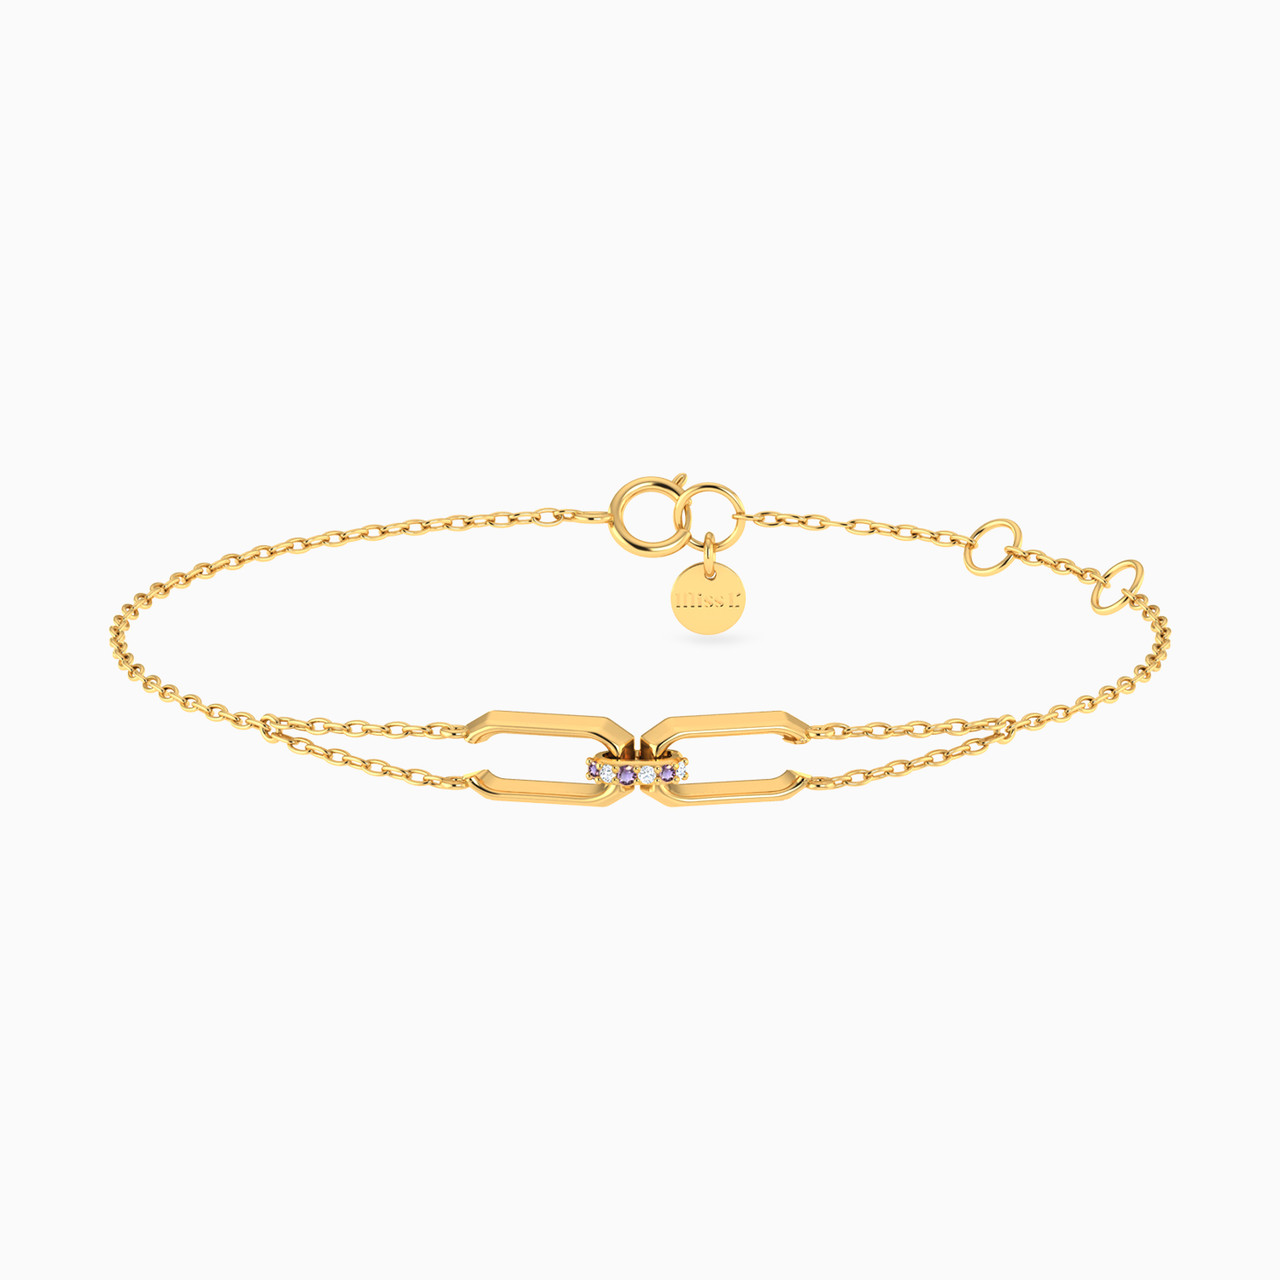 Rectangle Shaped Colored Stones Chain Bracelet in 18K Gold